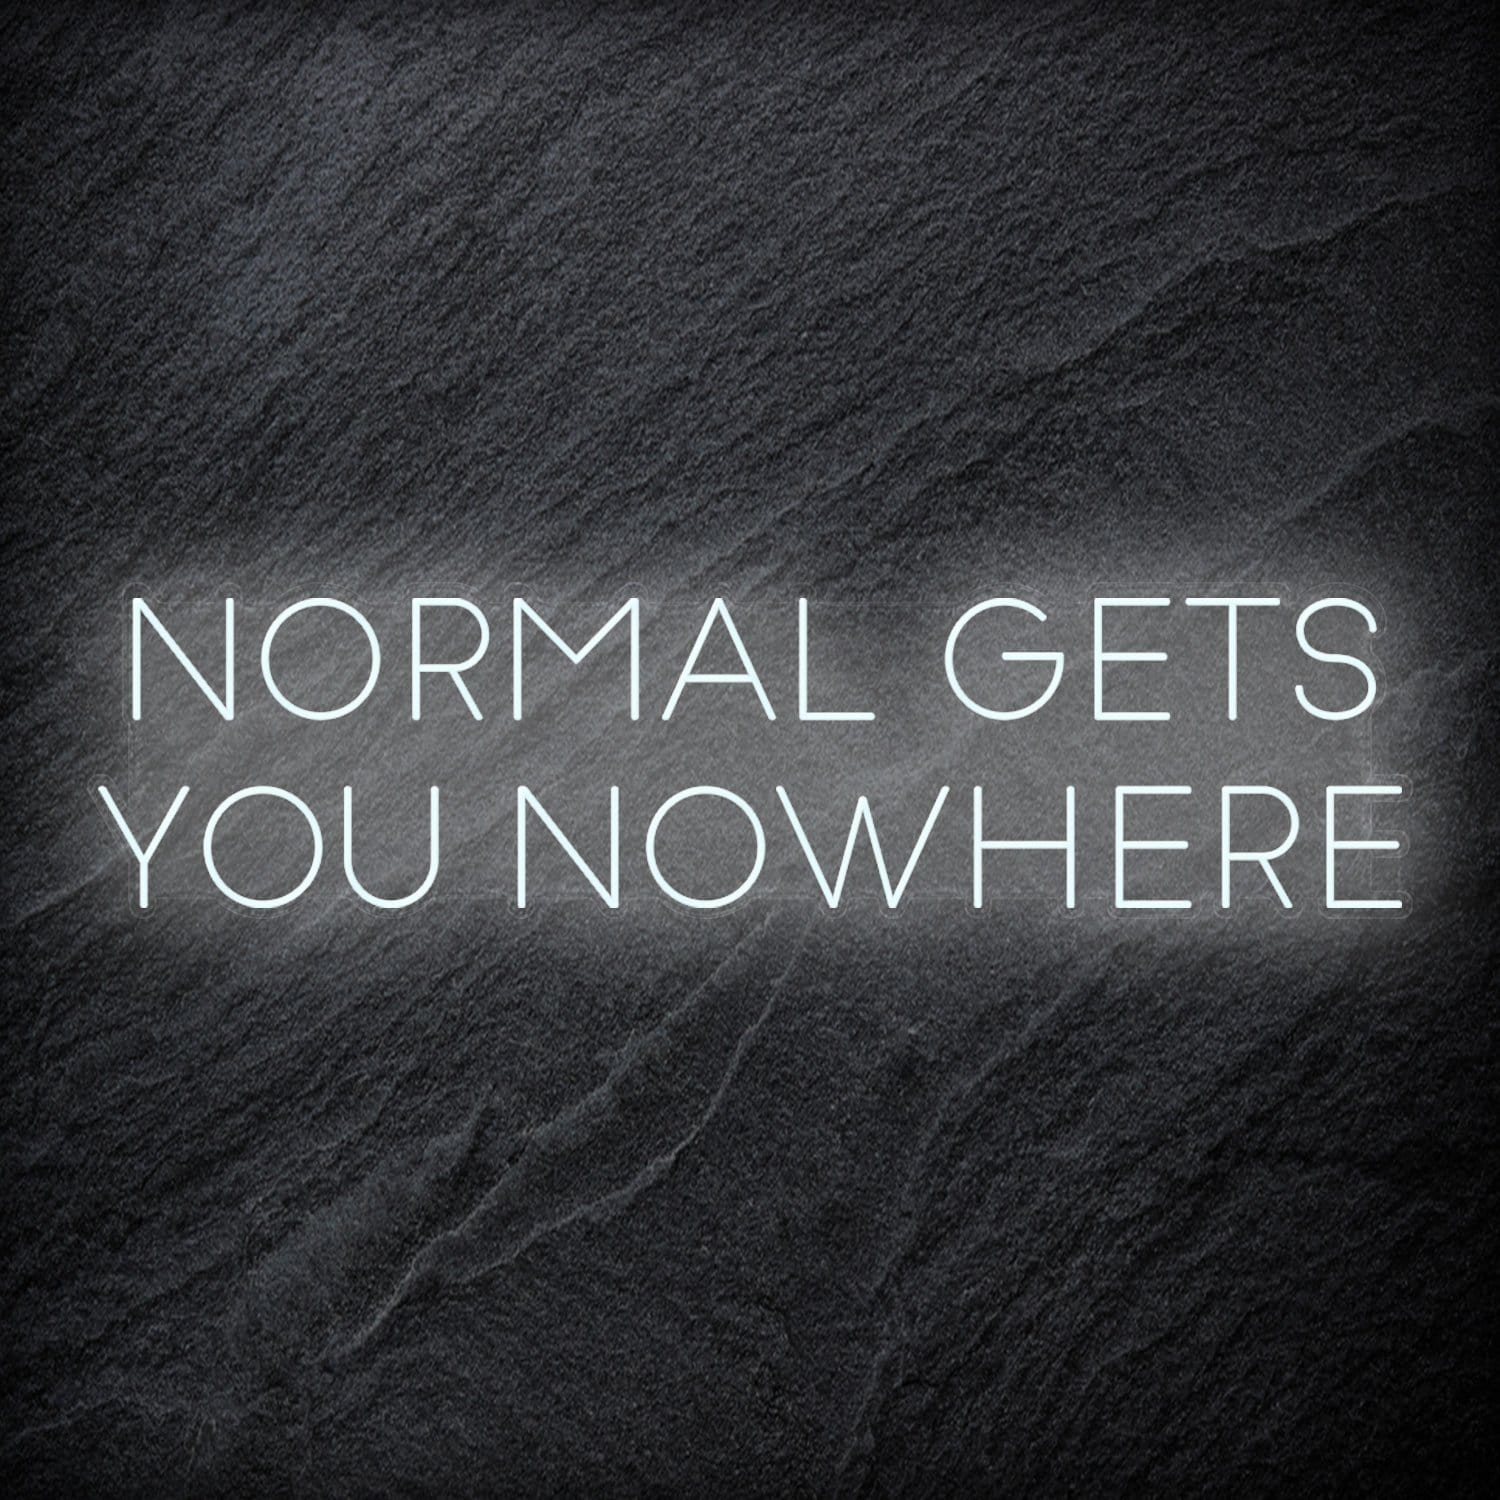 "Normal Gets You Nowhere" LED Neon Sign Schriftzug - NEONEVERGLOW